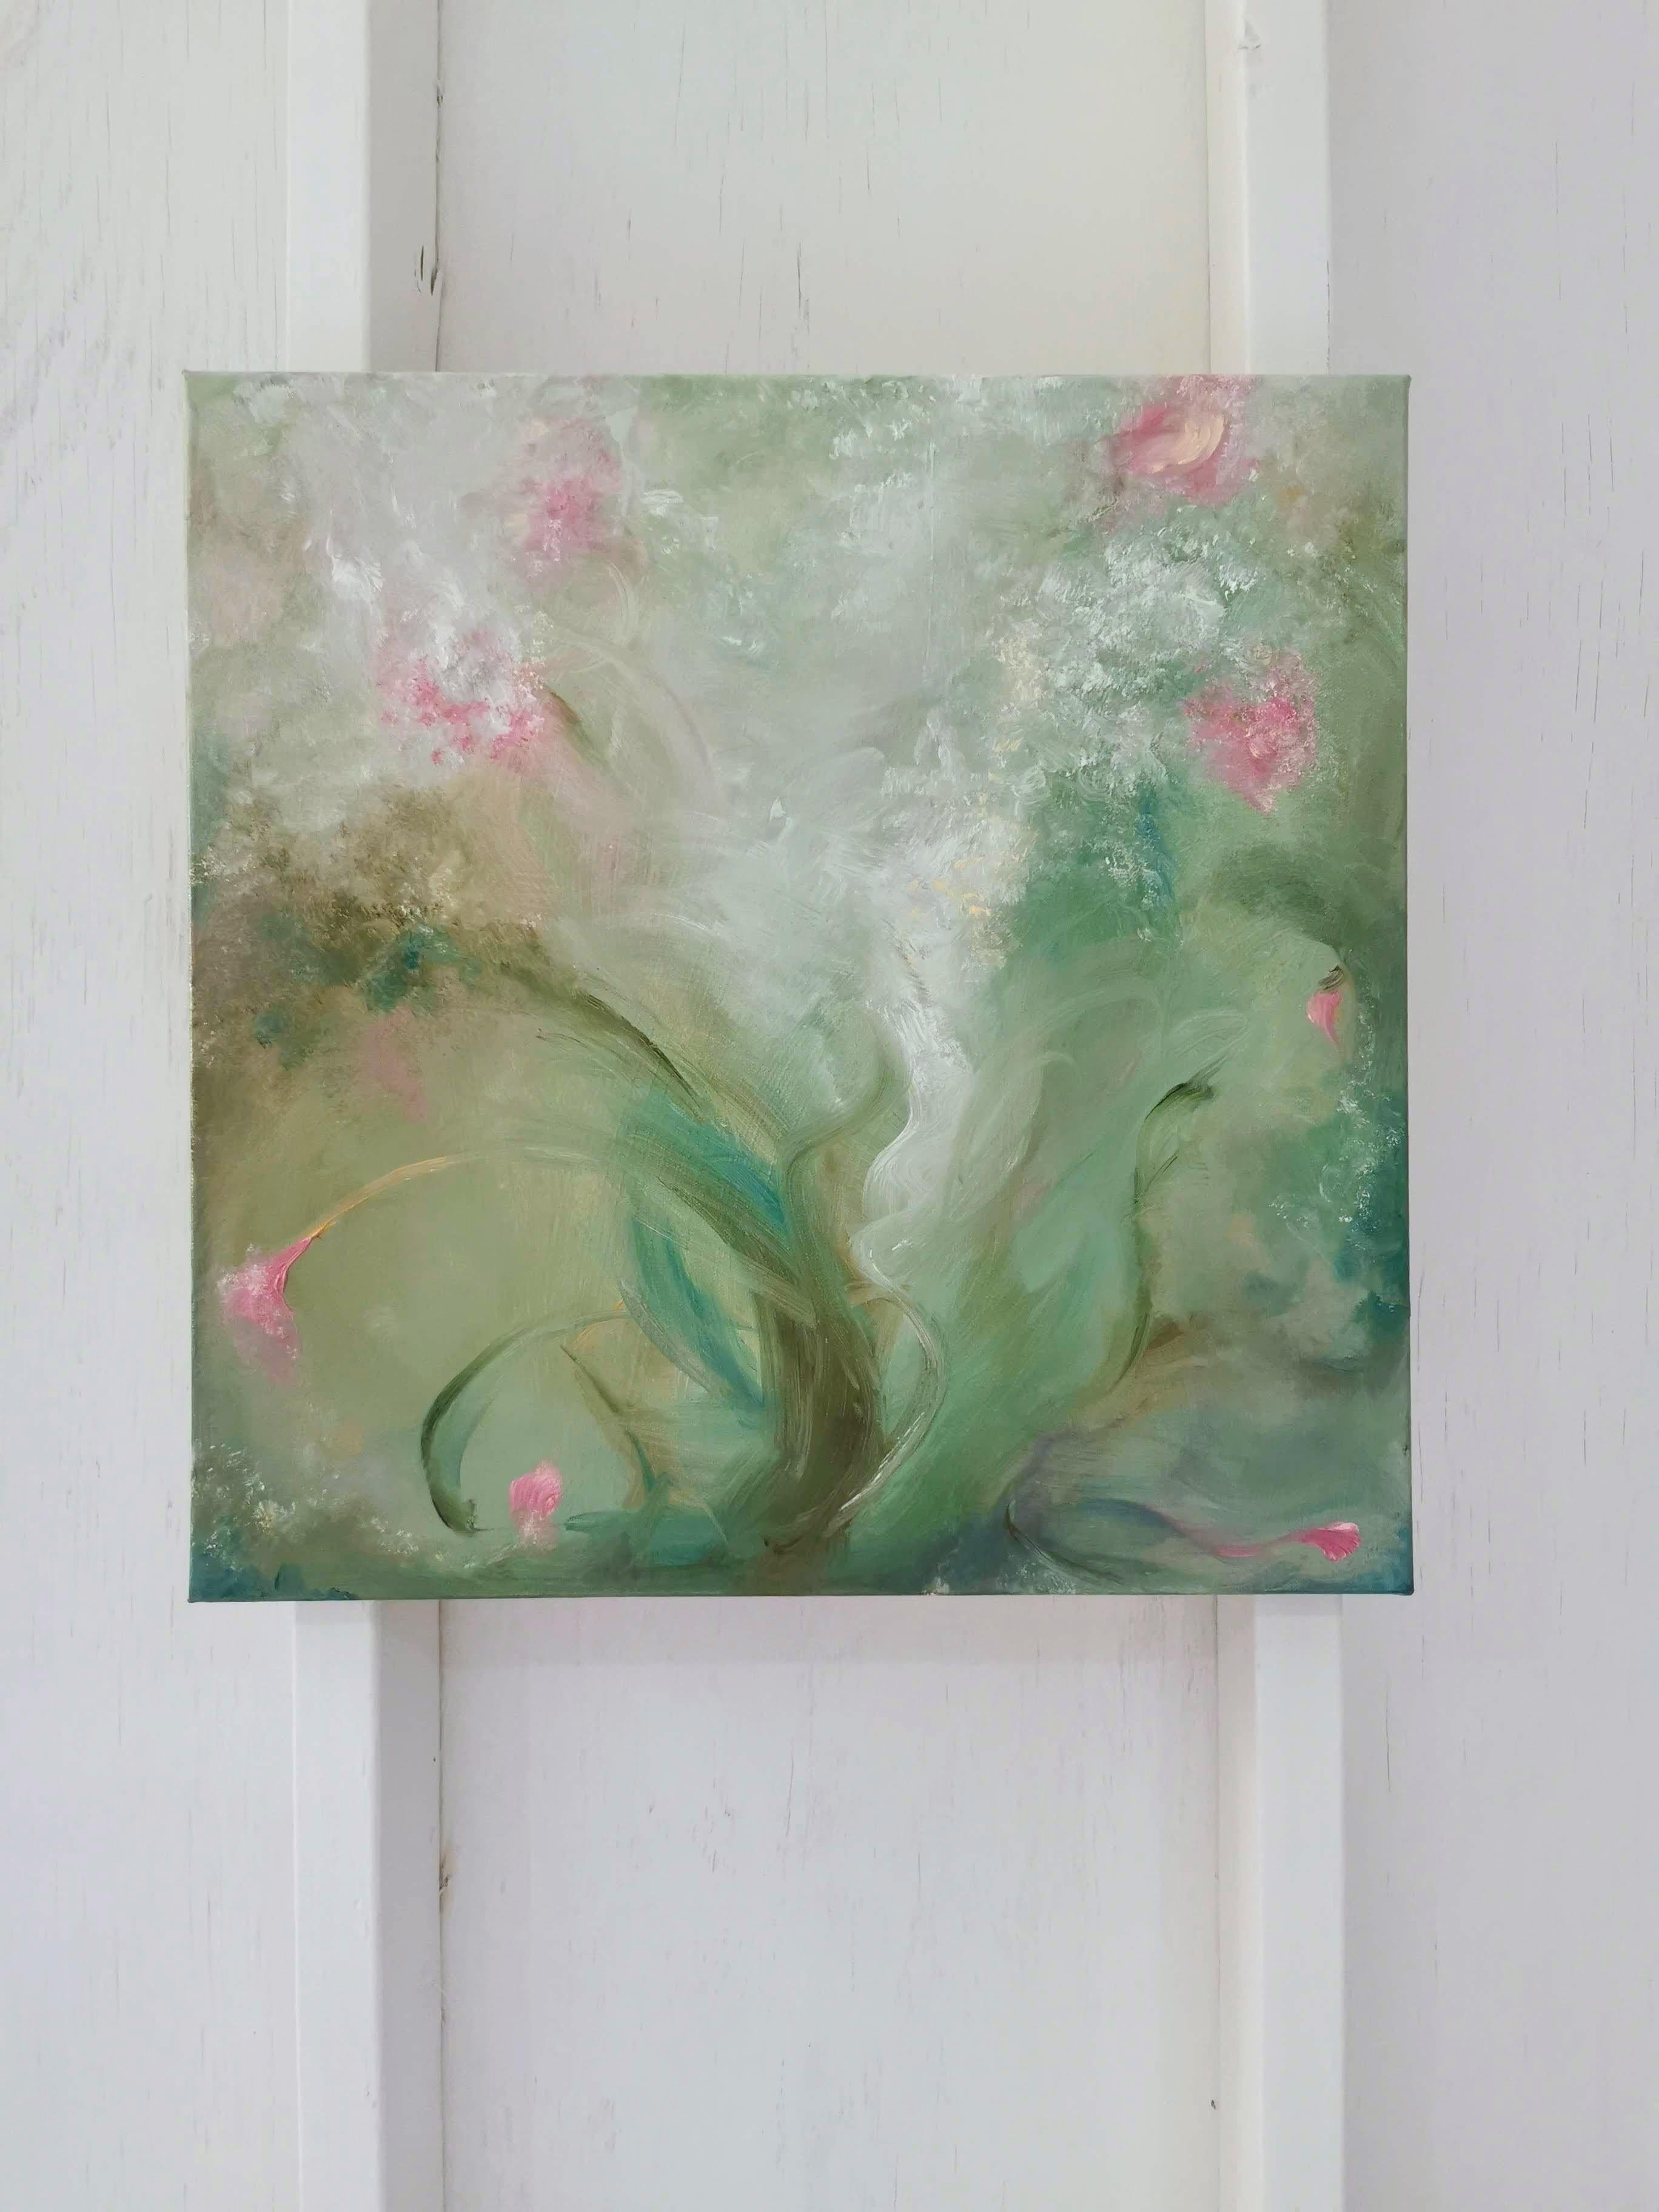 A most verdant spring - Whimsical green and pink abstract painting 9